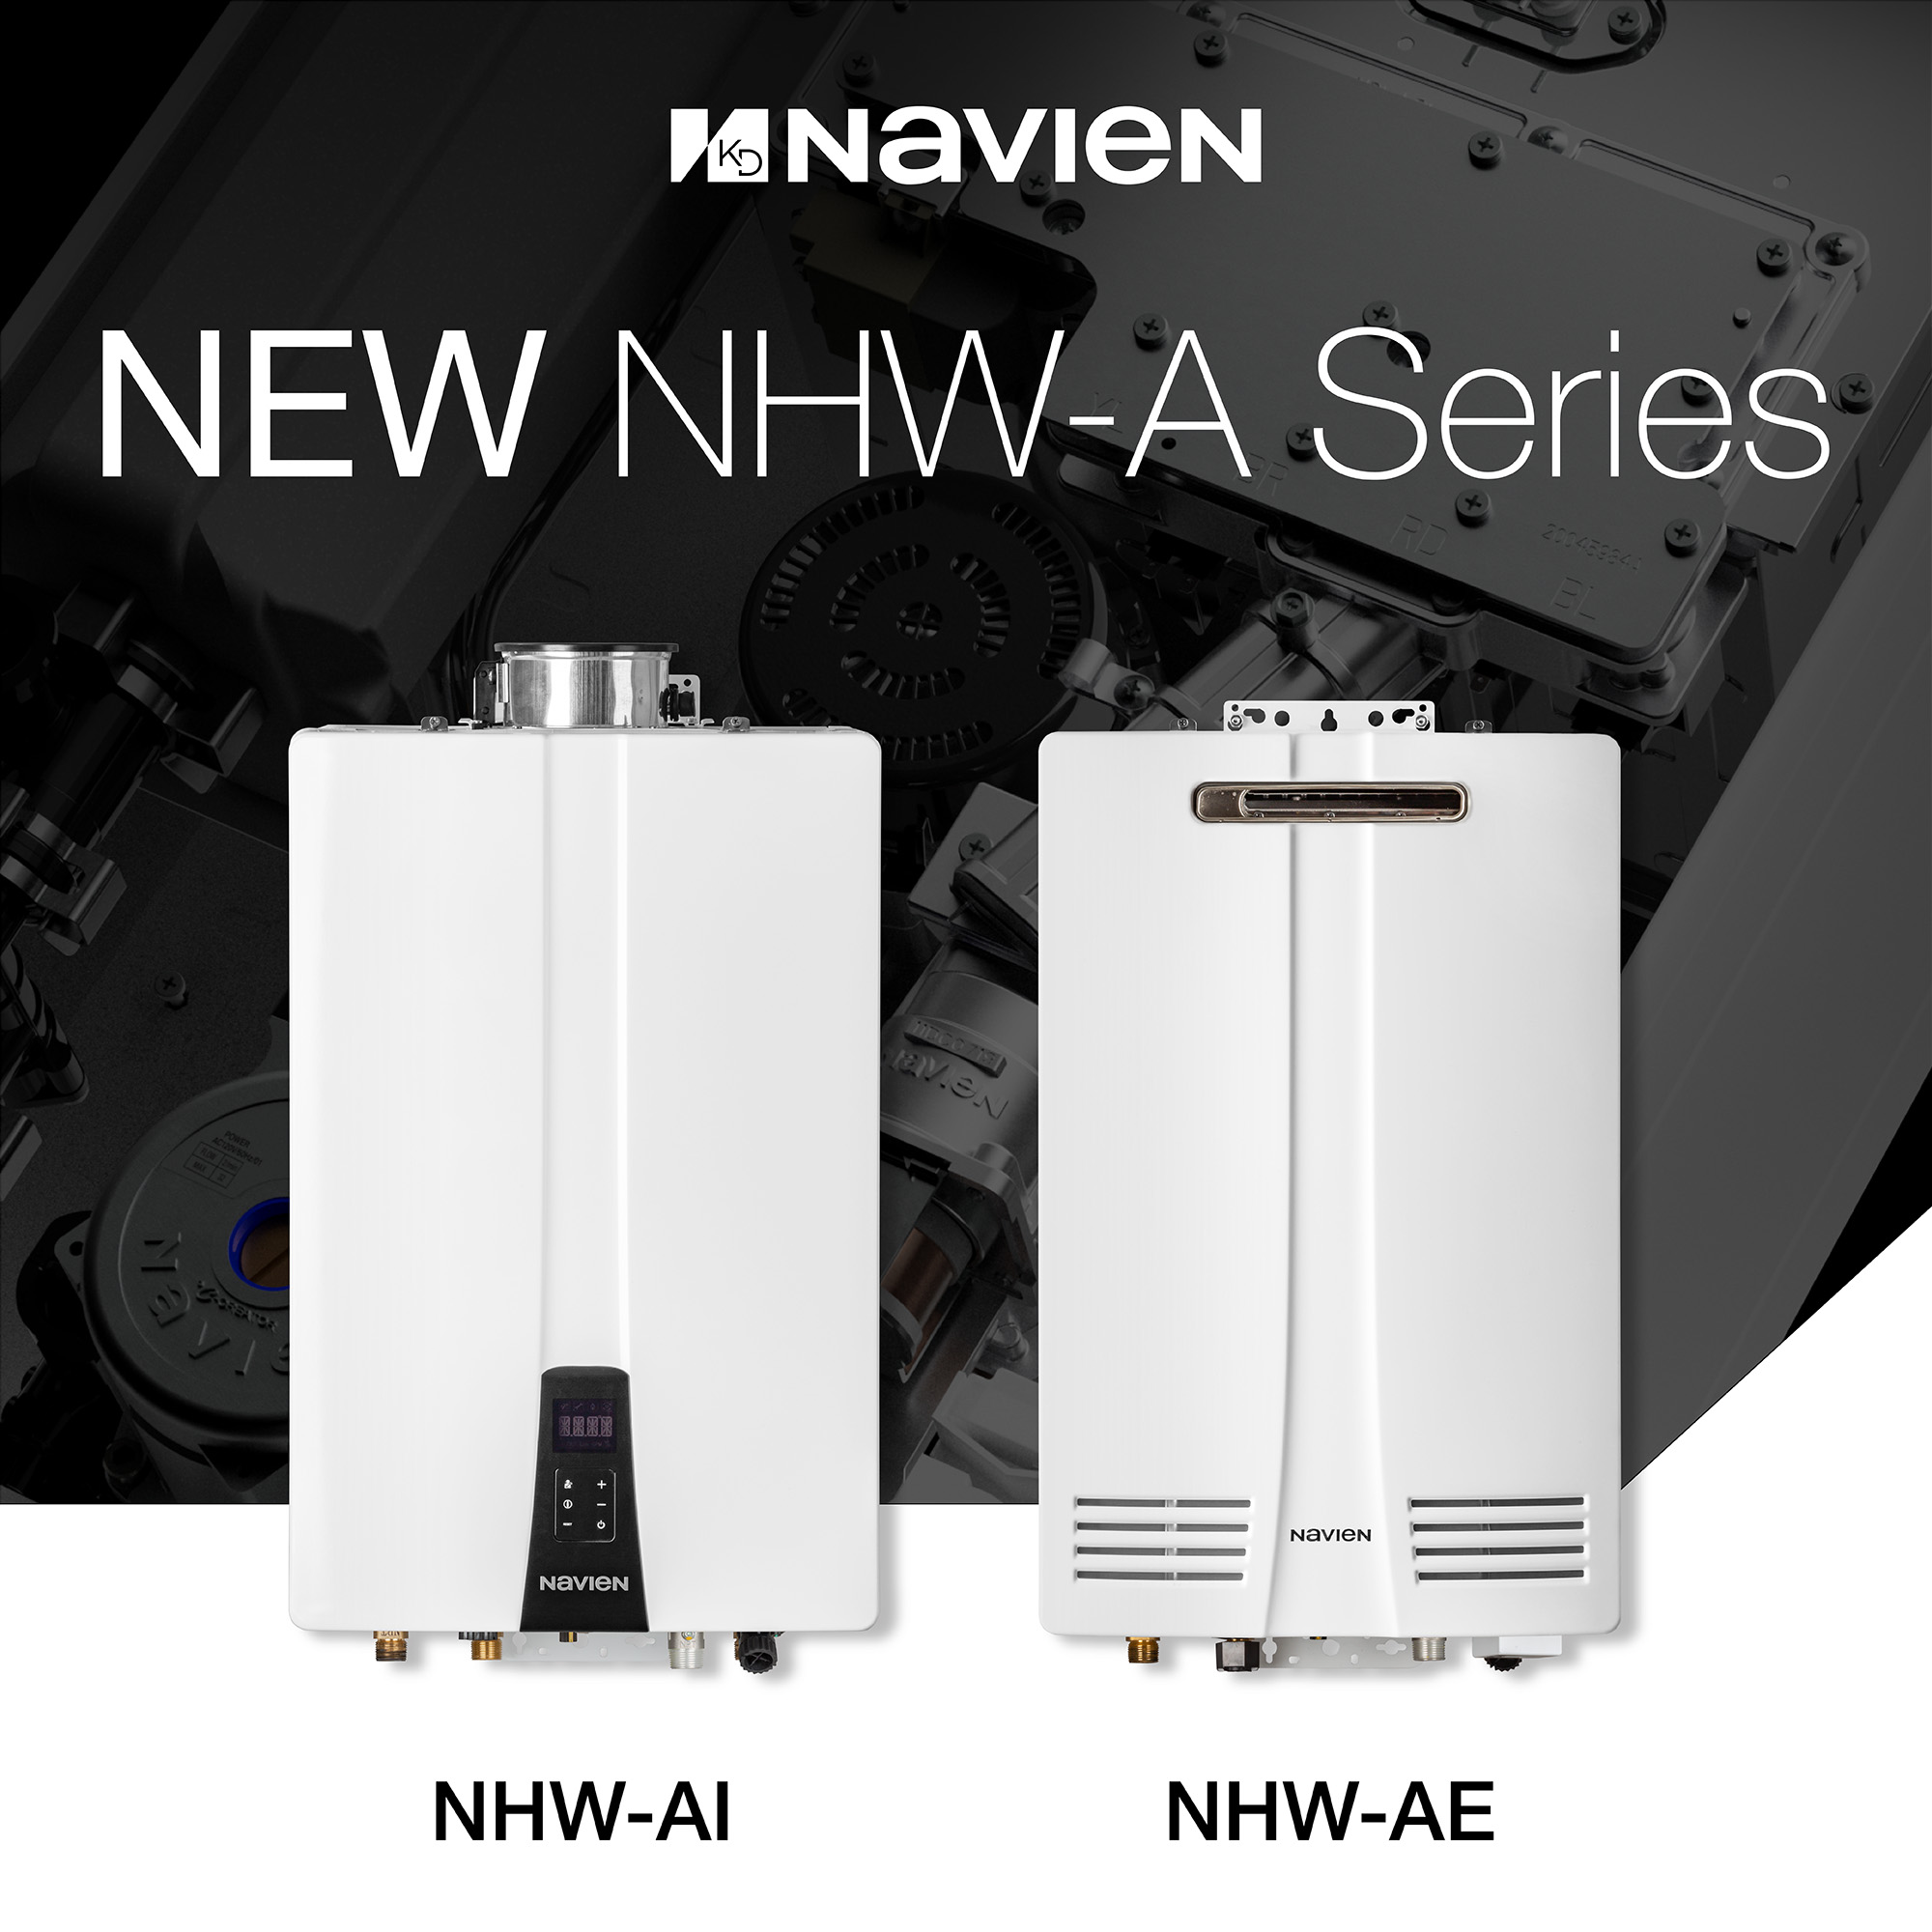 Navien NHW-A non-condensing tankless water heaters with ComfortFlow